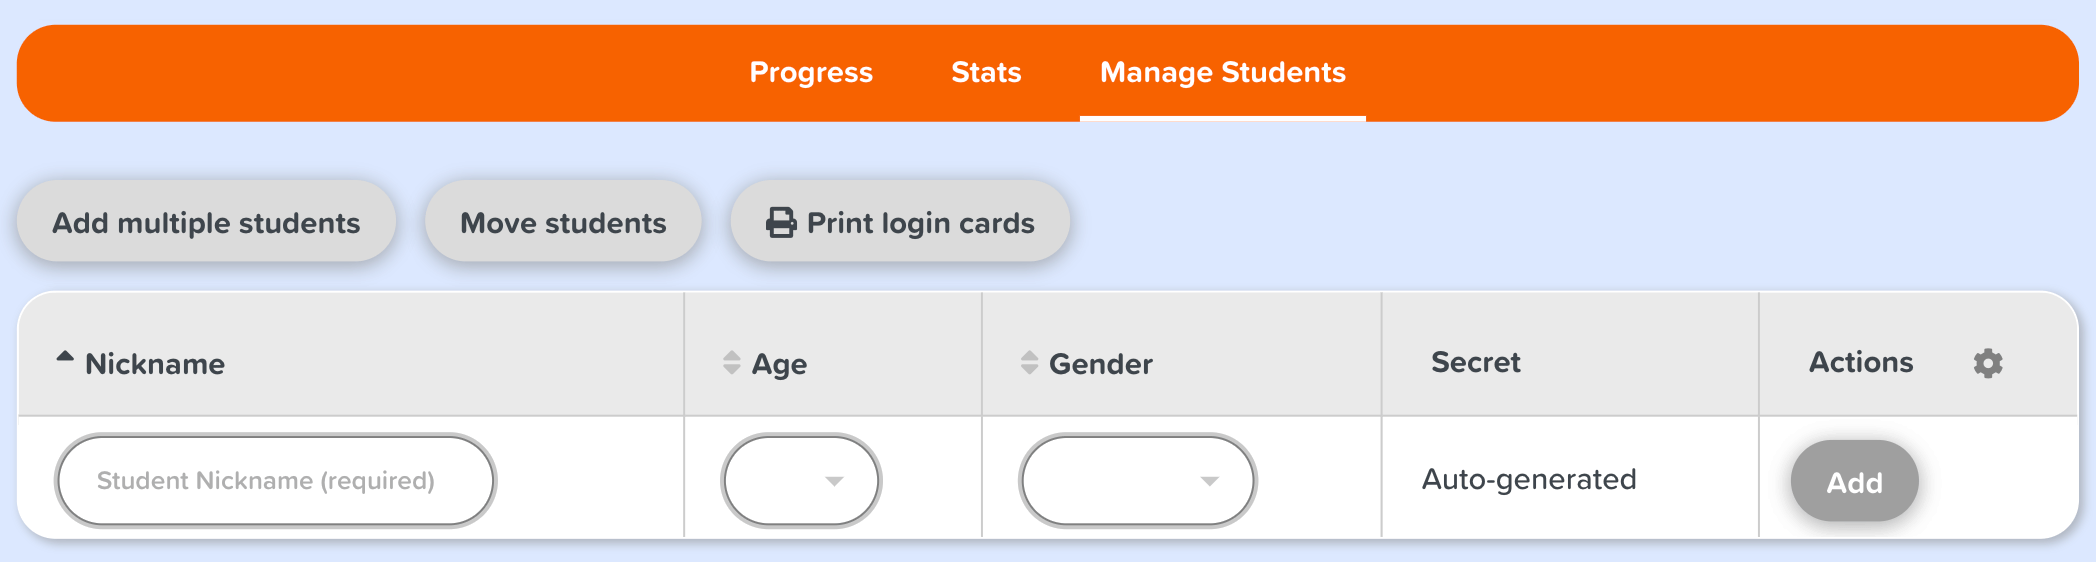 Manage Students tab